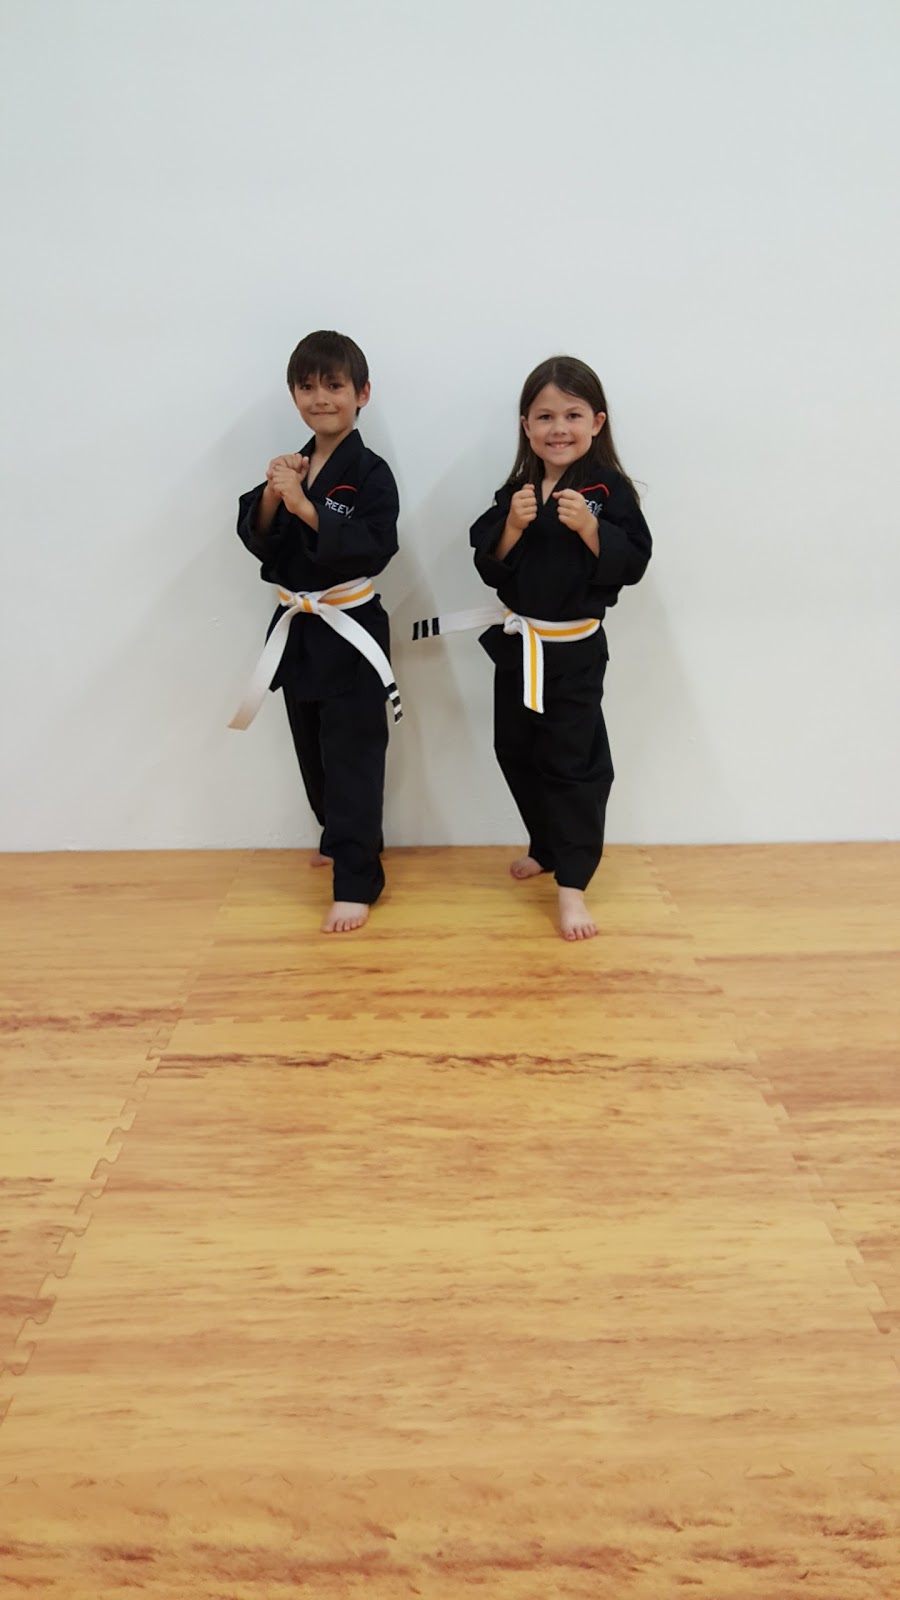 Reeves Martial Arts & Fitness | 4065 Grass Valley Hwy, Auburn, CA 95602, USA | Phone: (530) 863-0822